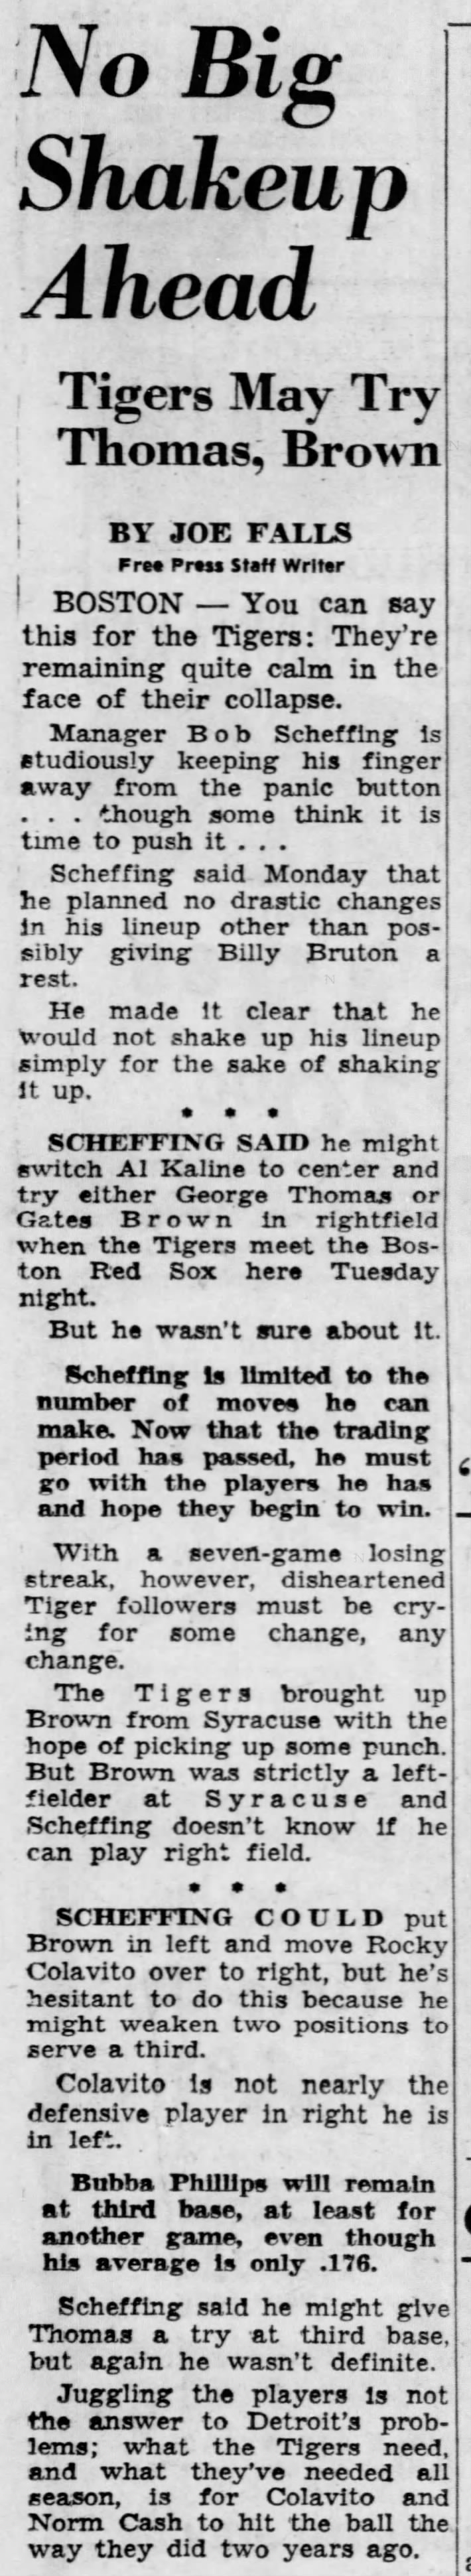 Tues 6/18/63: Brown plans after call-up